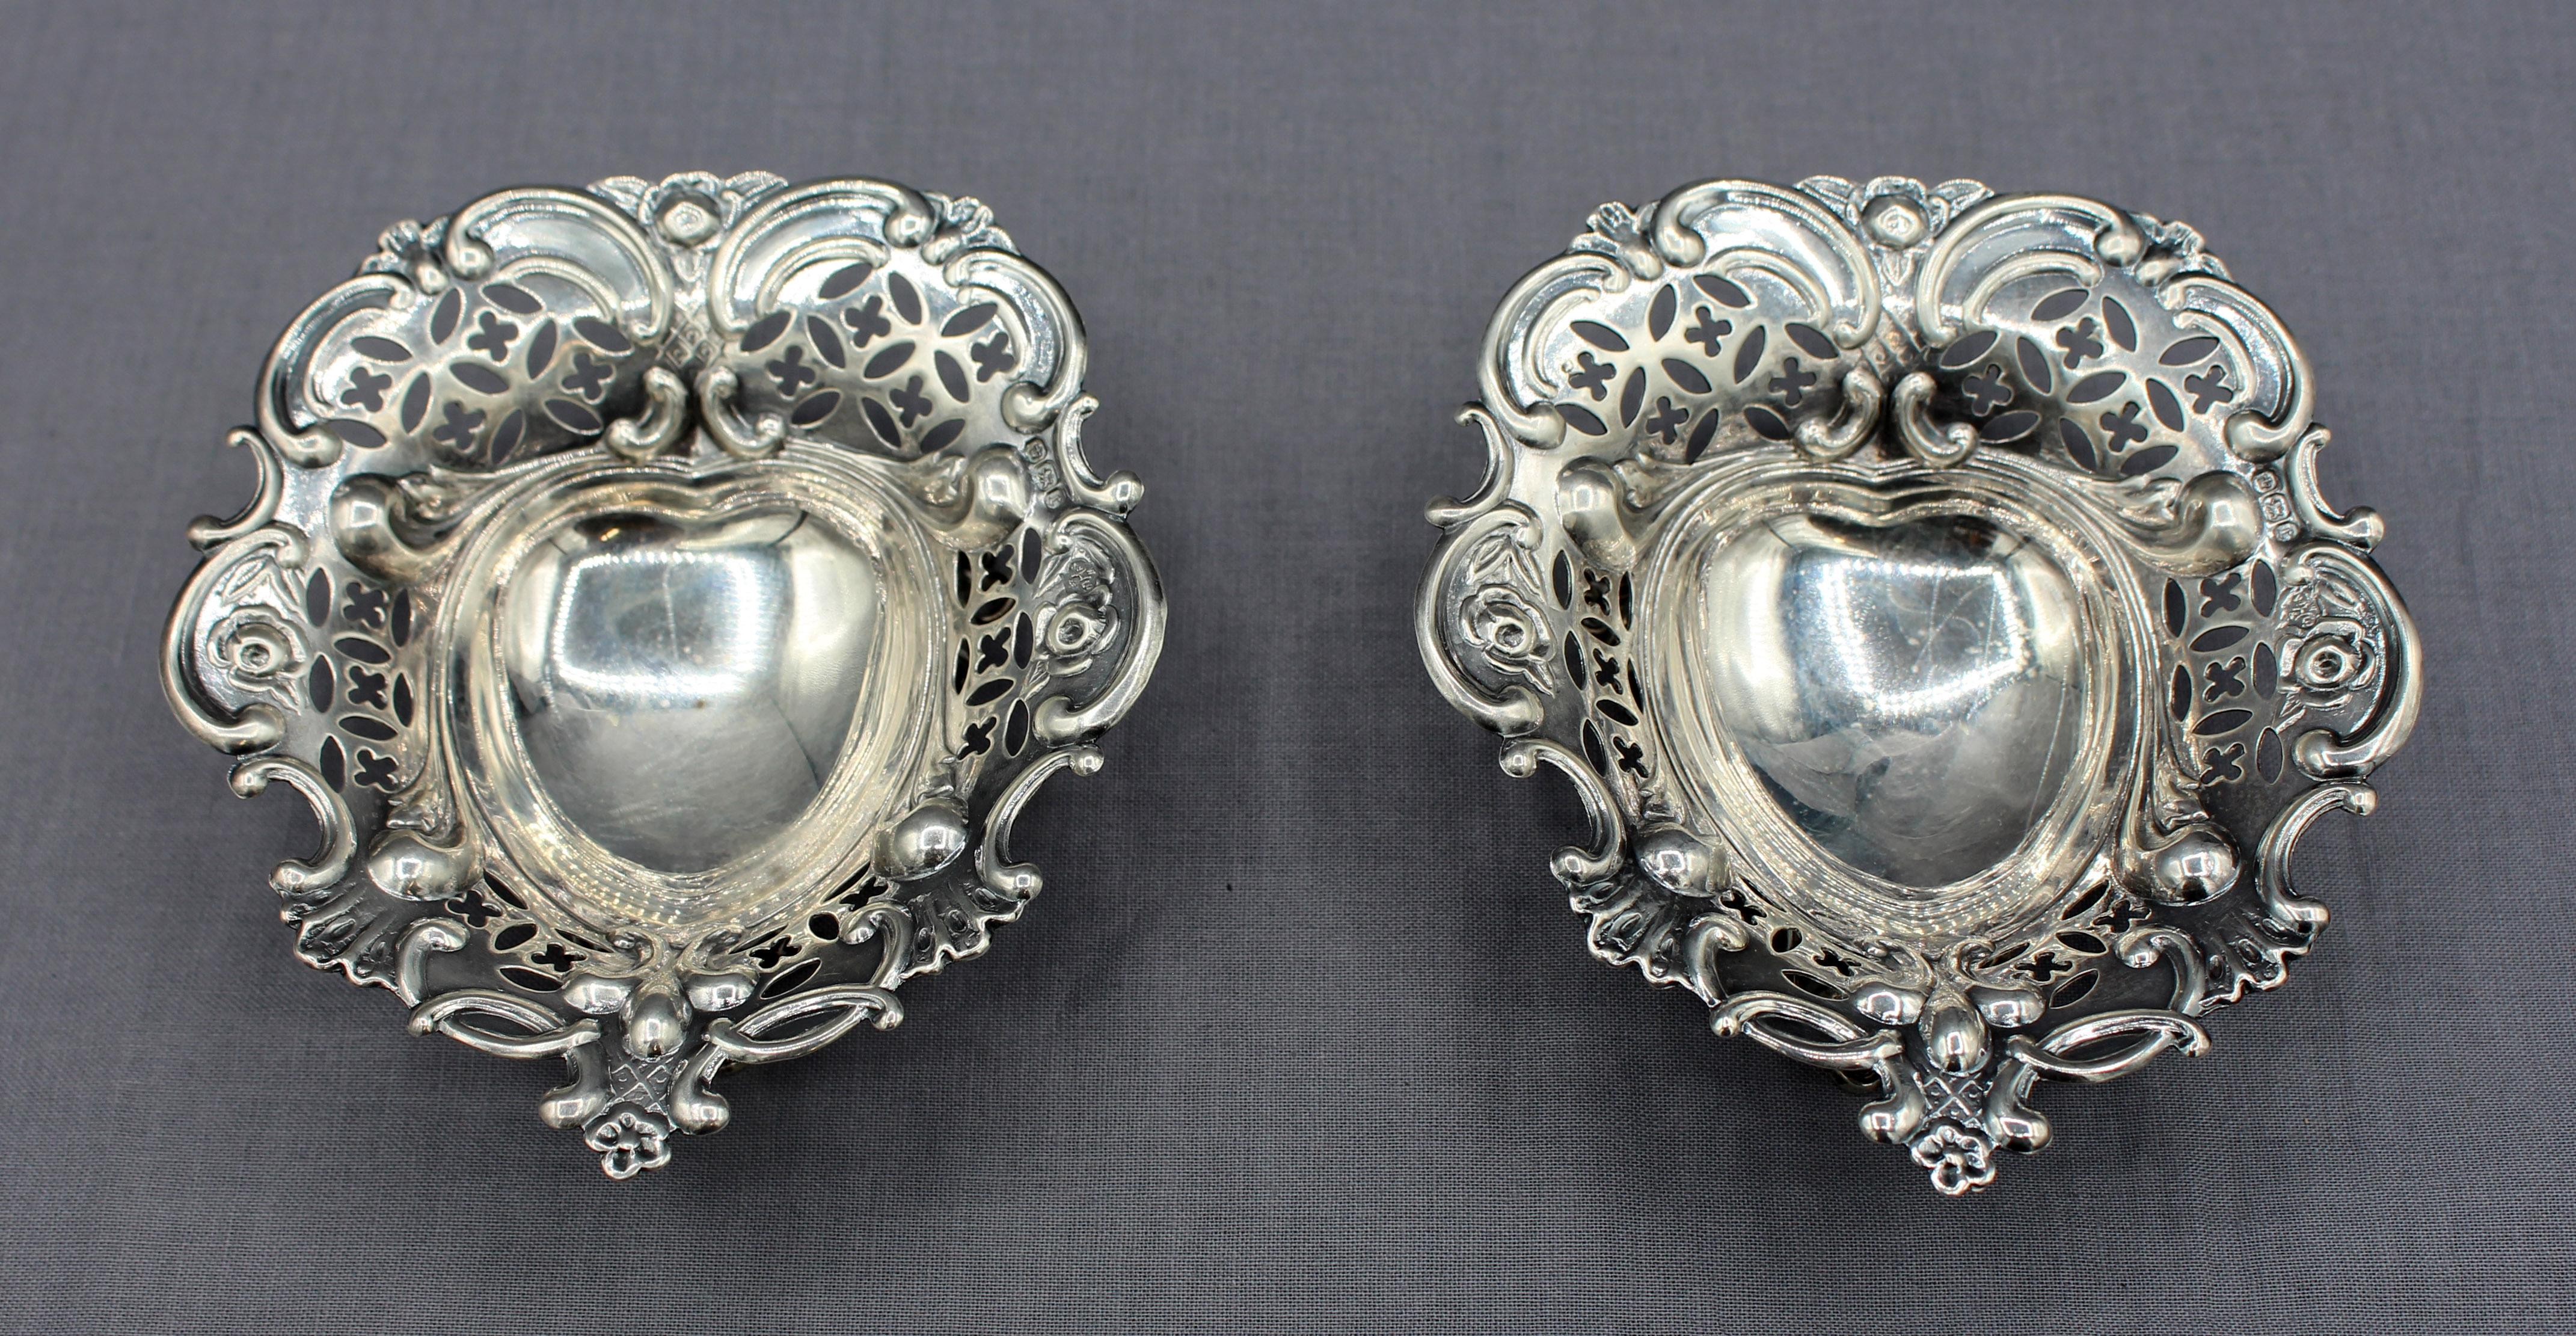 Pair of sterling silver cut work heart shaped dishes, Sheffield, England, 1895. In as is presentation box. Made by William Hutton & Sons. 2.50 troy oz.
Each dish: 4